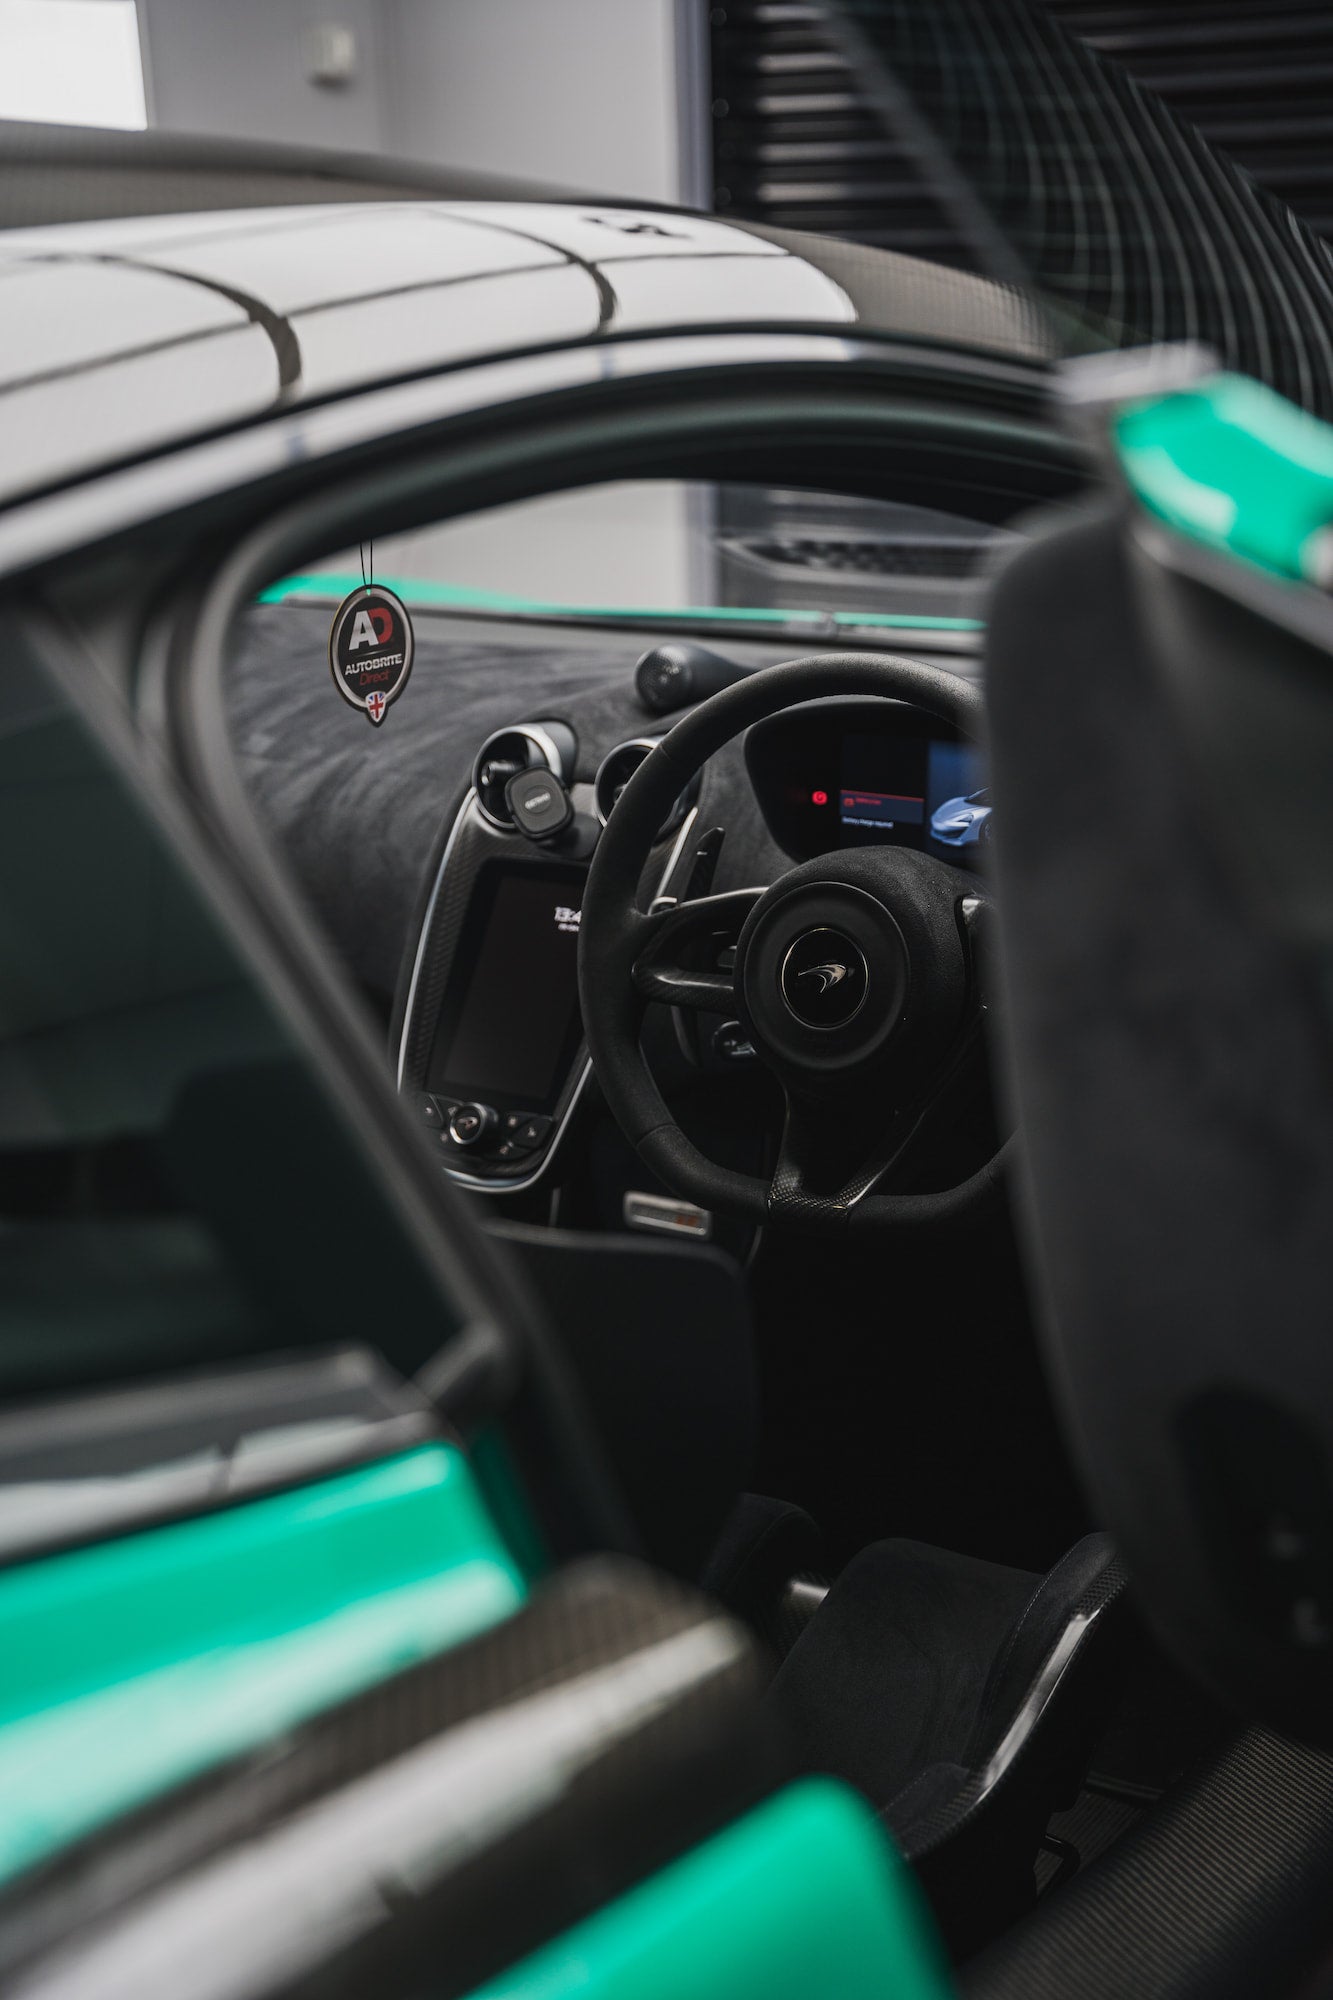 Interior and steering wheel of a green McLaren with an AD hanging air freshener